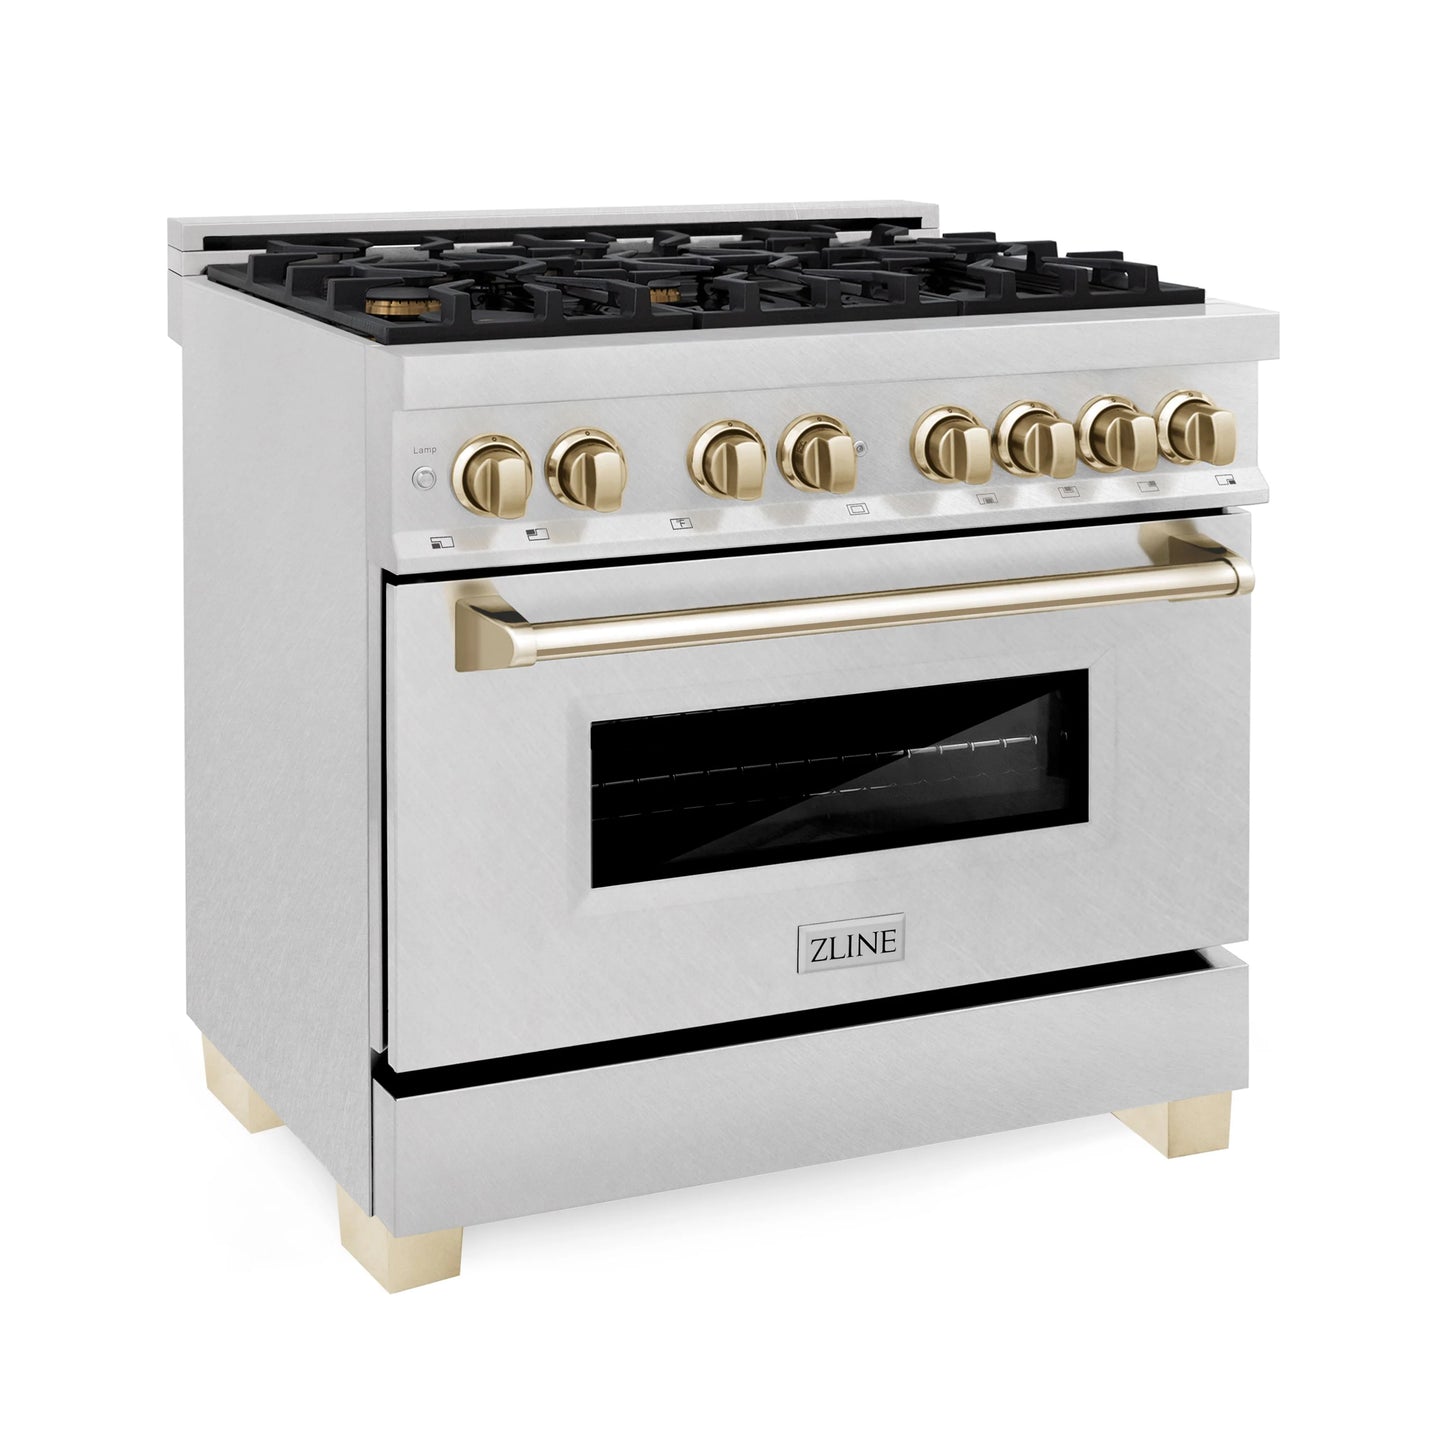 ZLINE Autograph Edition 36 in. Dual Fuel Range in DuraSnow Steel with Gold Accents (RASZ-SN-36-G)